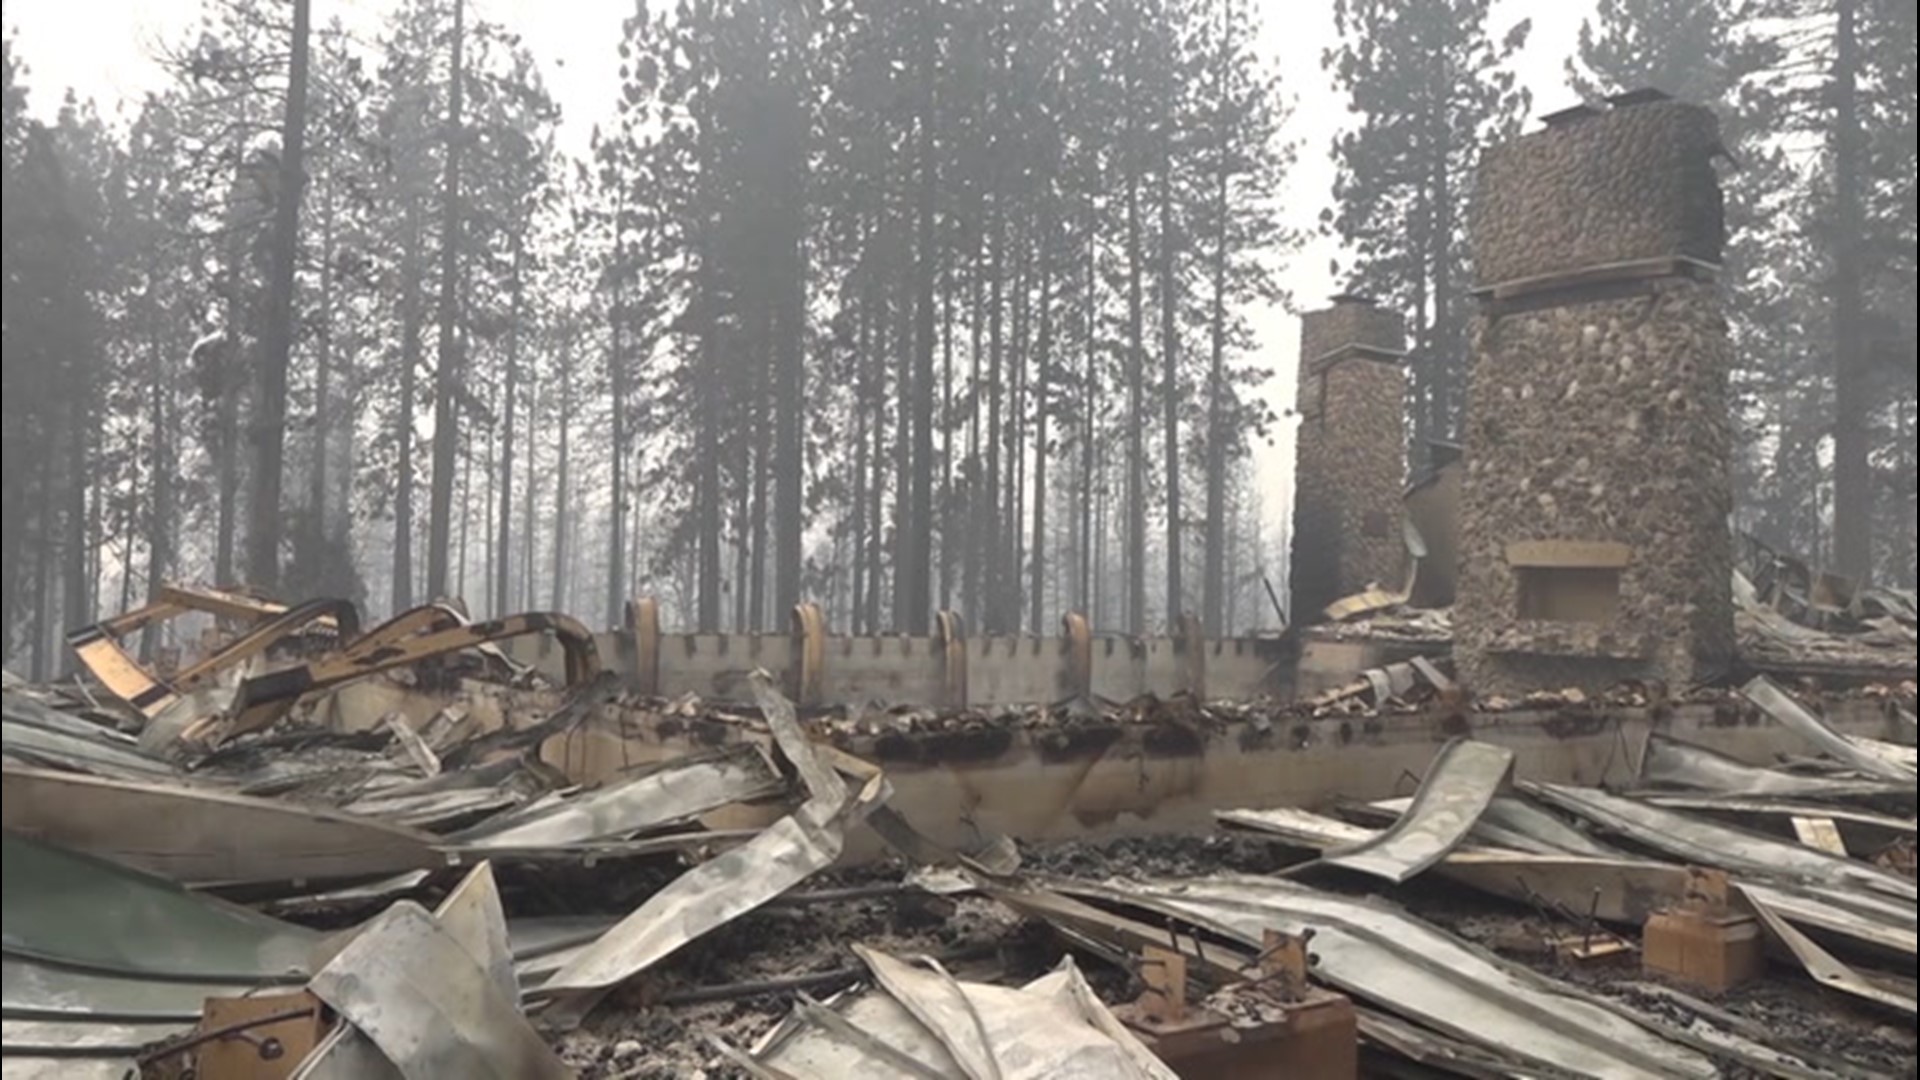 Hundreds of homes were destroyed in the historic 2020 California wildfire season. Crews are working to prevent toxic elements from reaching water sources.